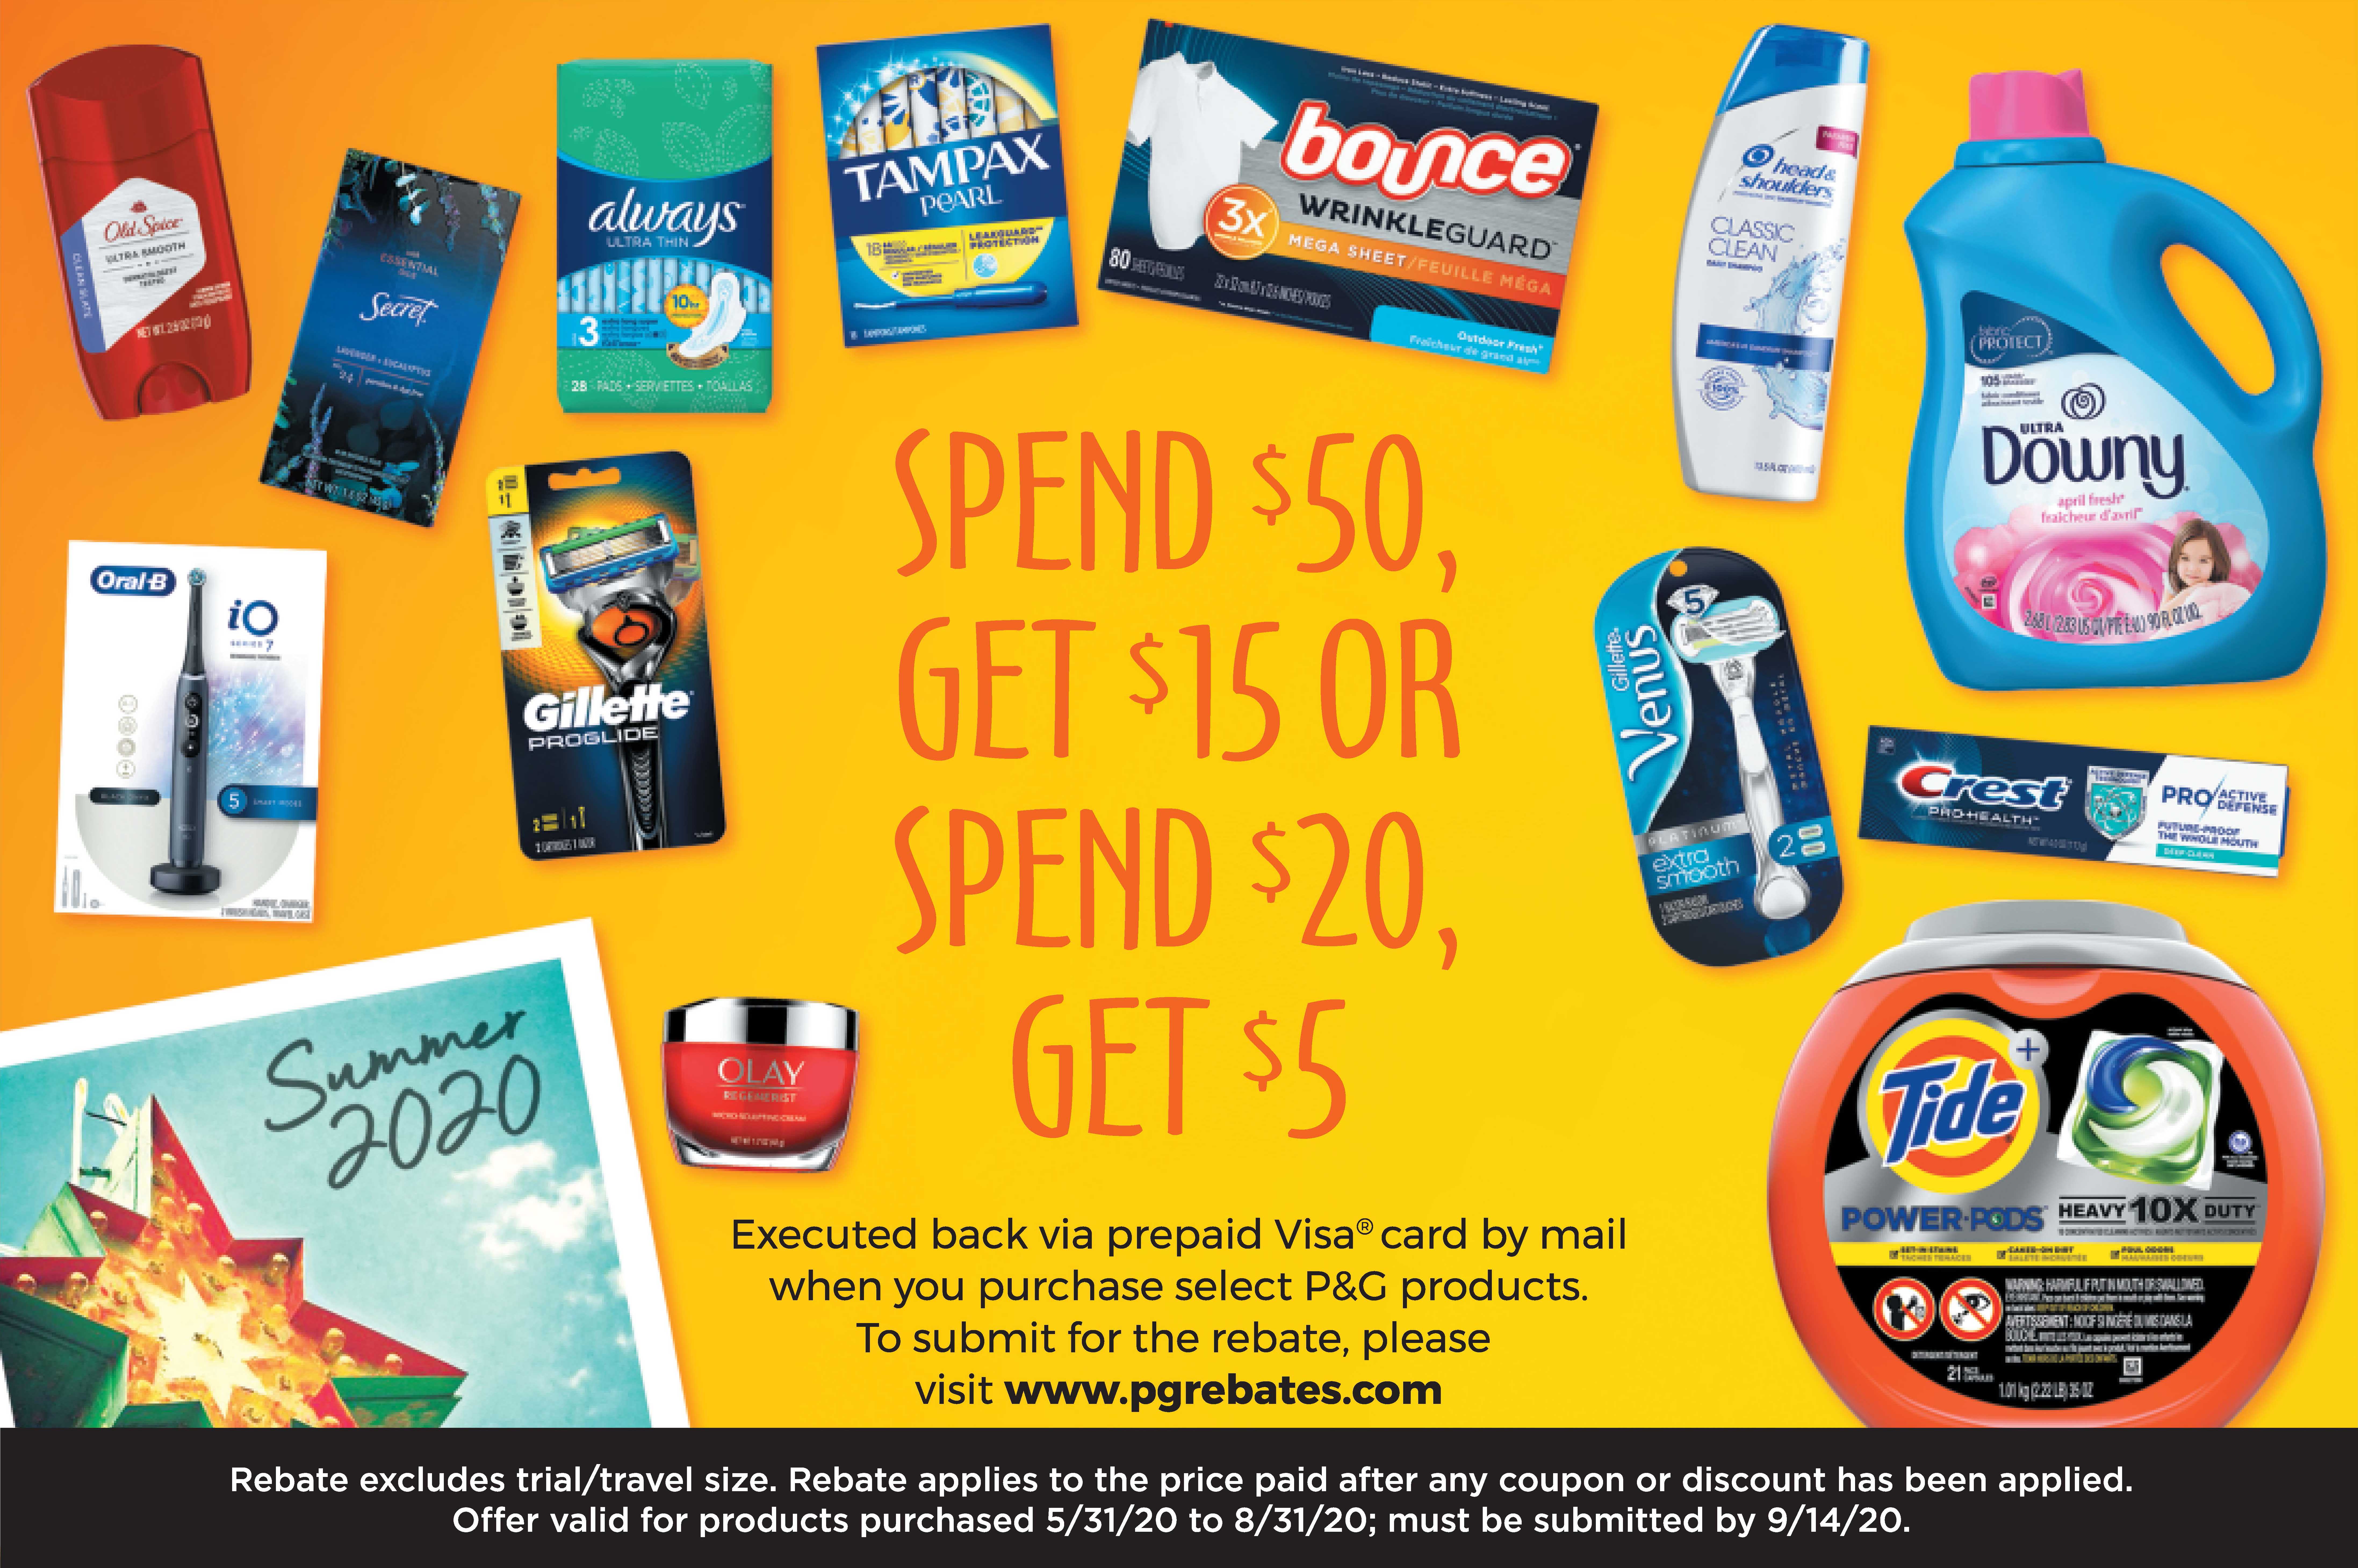 Get a $15 VISA prepaid card when you spend $50 on P&G products! Or a $5 GC with a $20 purchase!